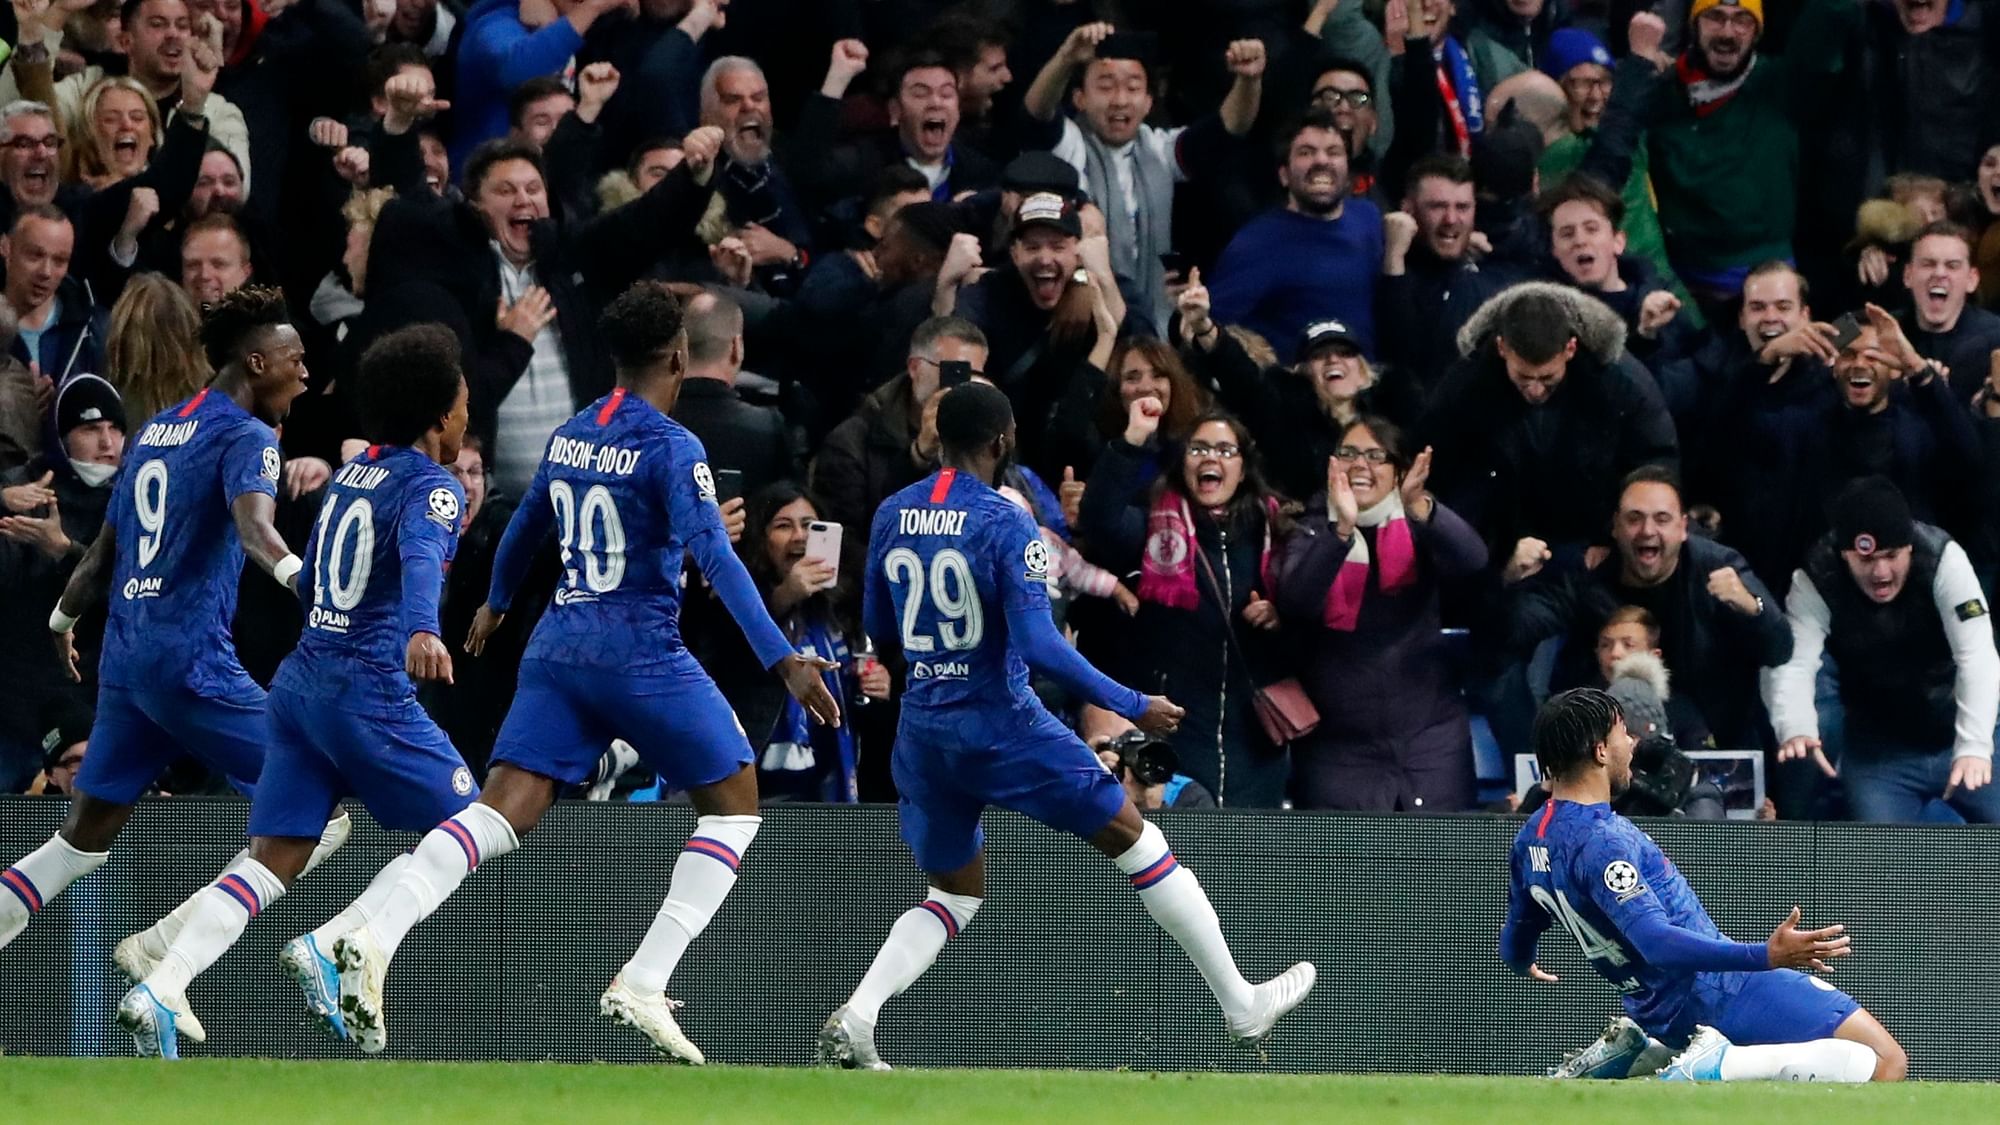 Chelsea celebrate their fourth goal of the game, headed in by defender Reece James.